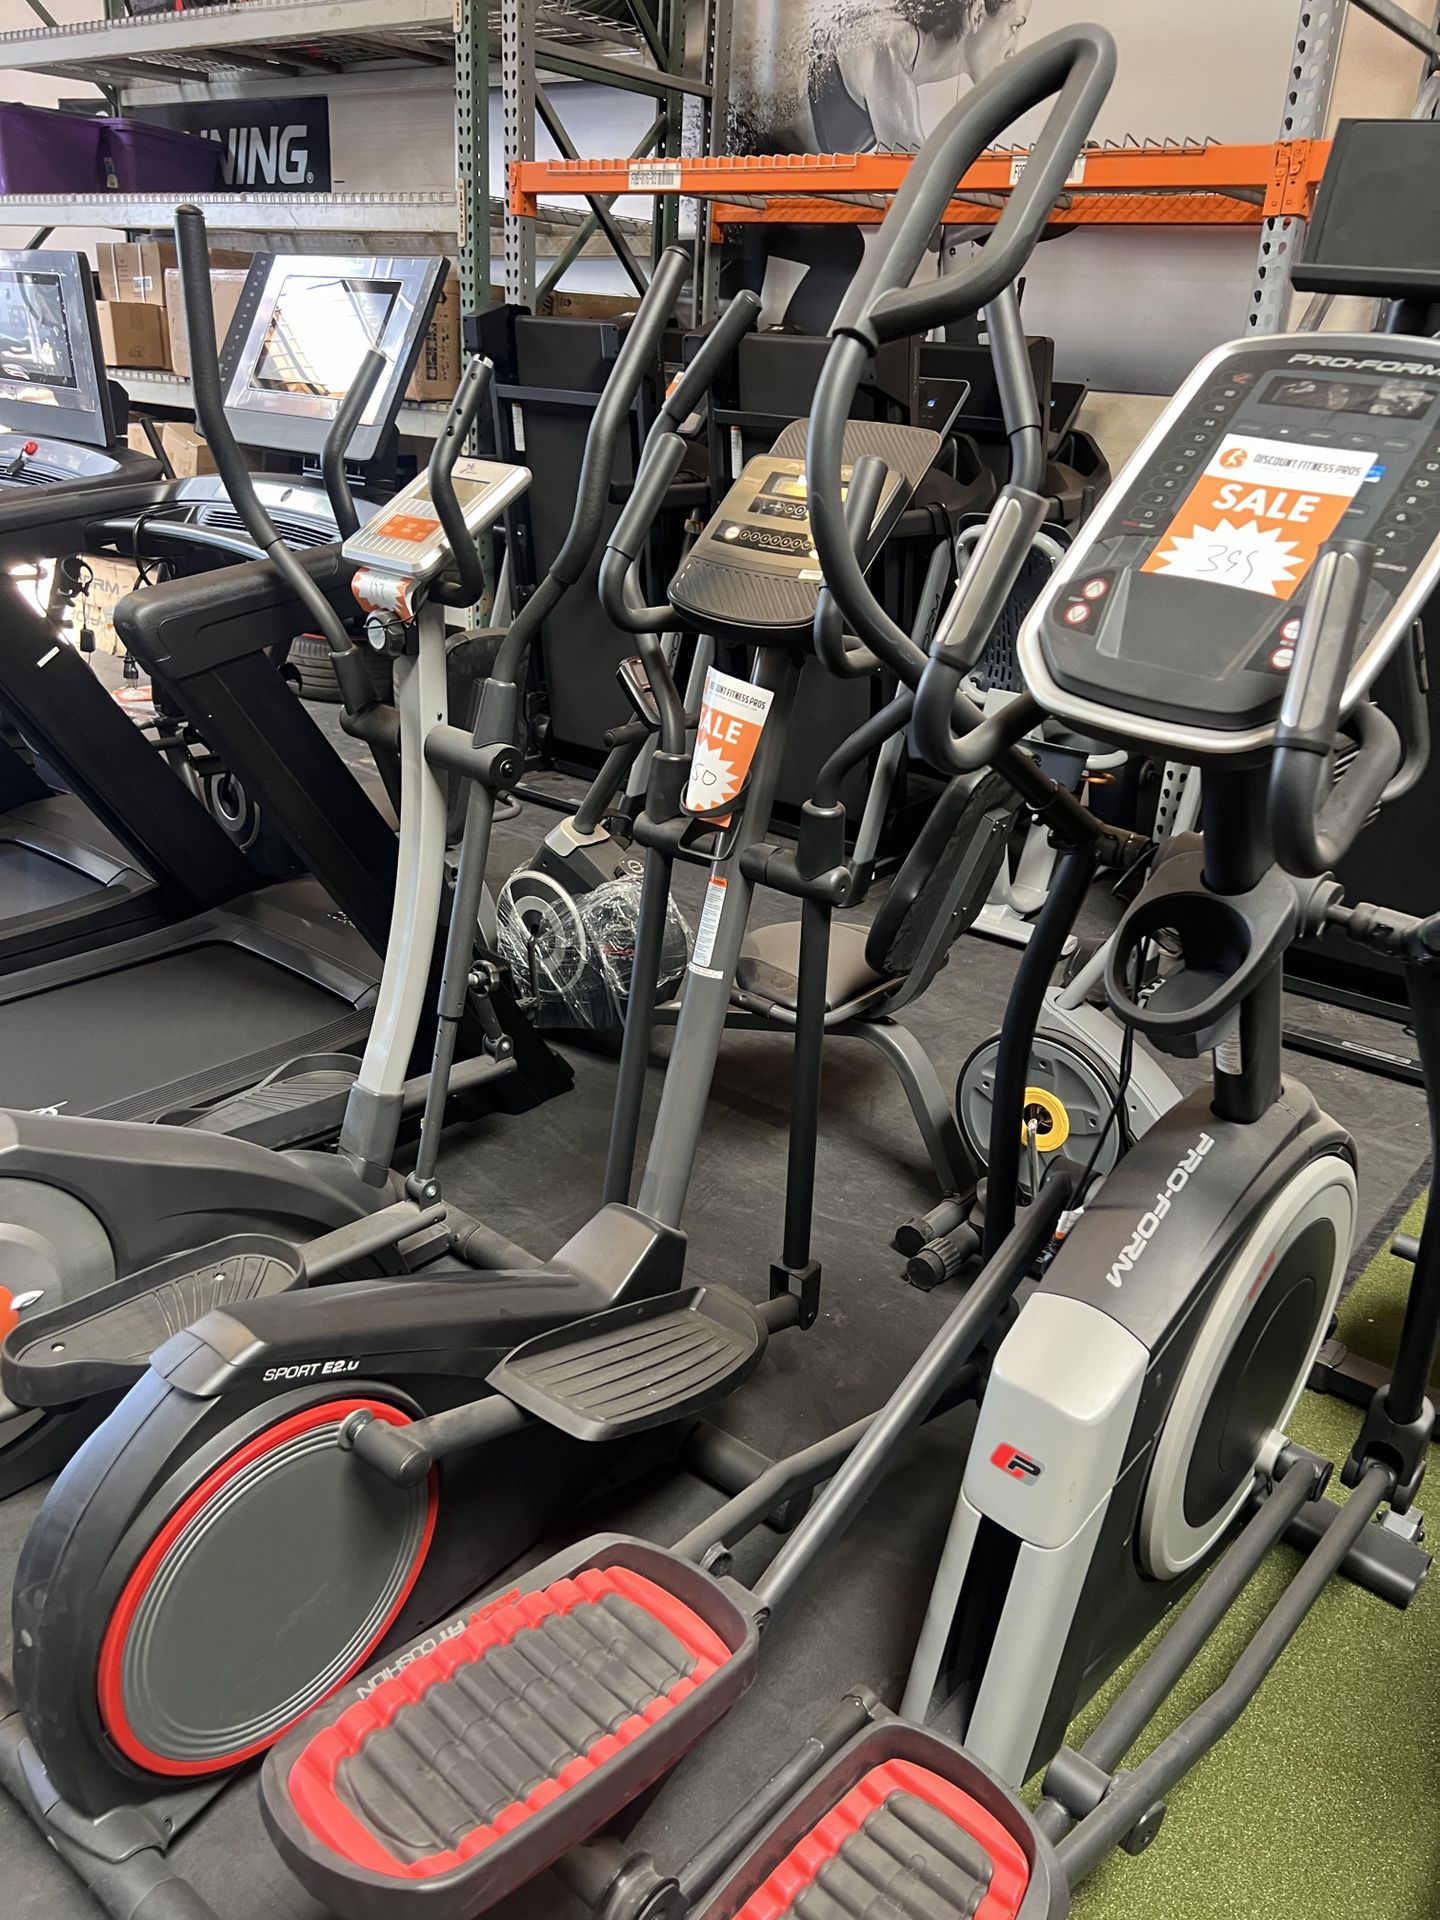 Exercise ellipticals from $199